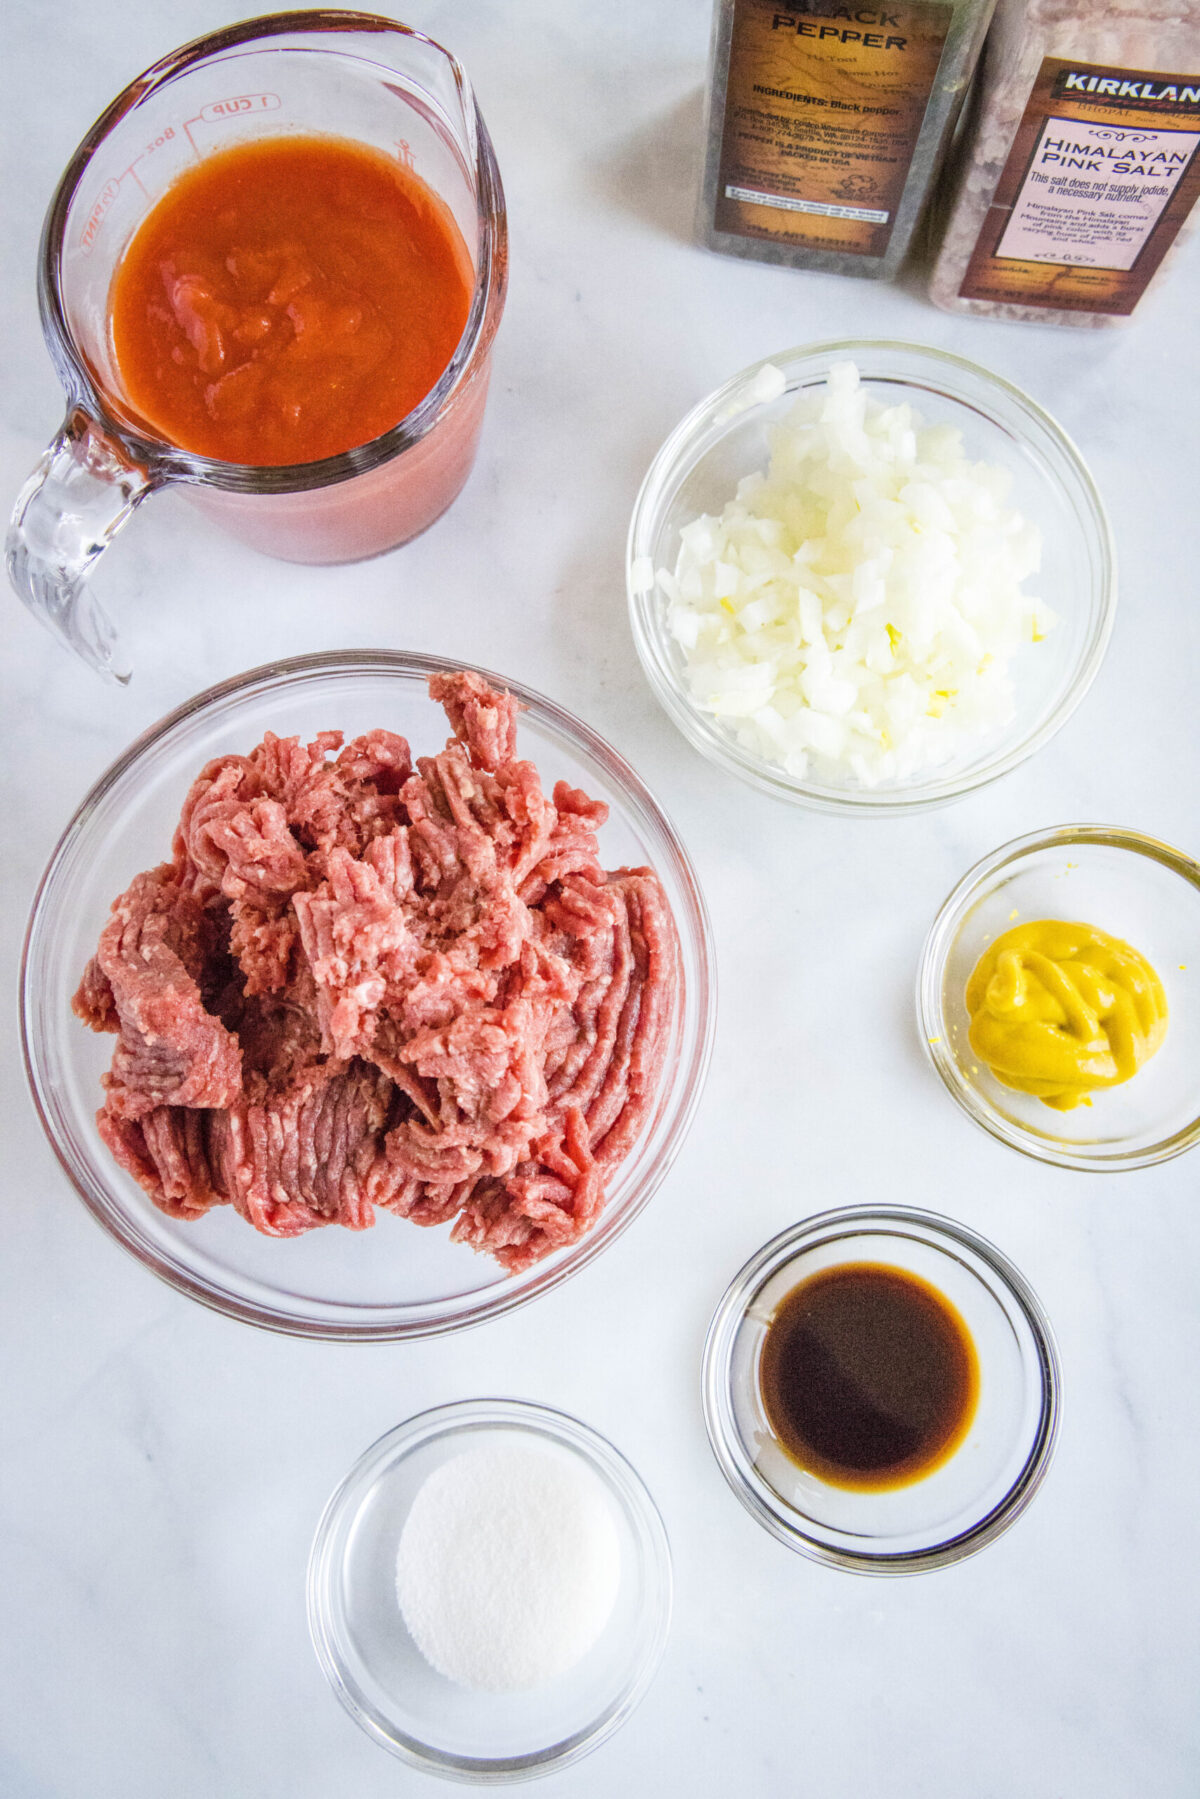 Overhead view of the ingredients needed for sloppy joes: a bowl of ground beef, a pyrex of tomato sauce, a bowl of onions, a bowl of mustard, a bowl of Worcestershire sauce, a bowl of sugar, a salt grinder, and a pepper grinder